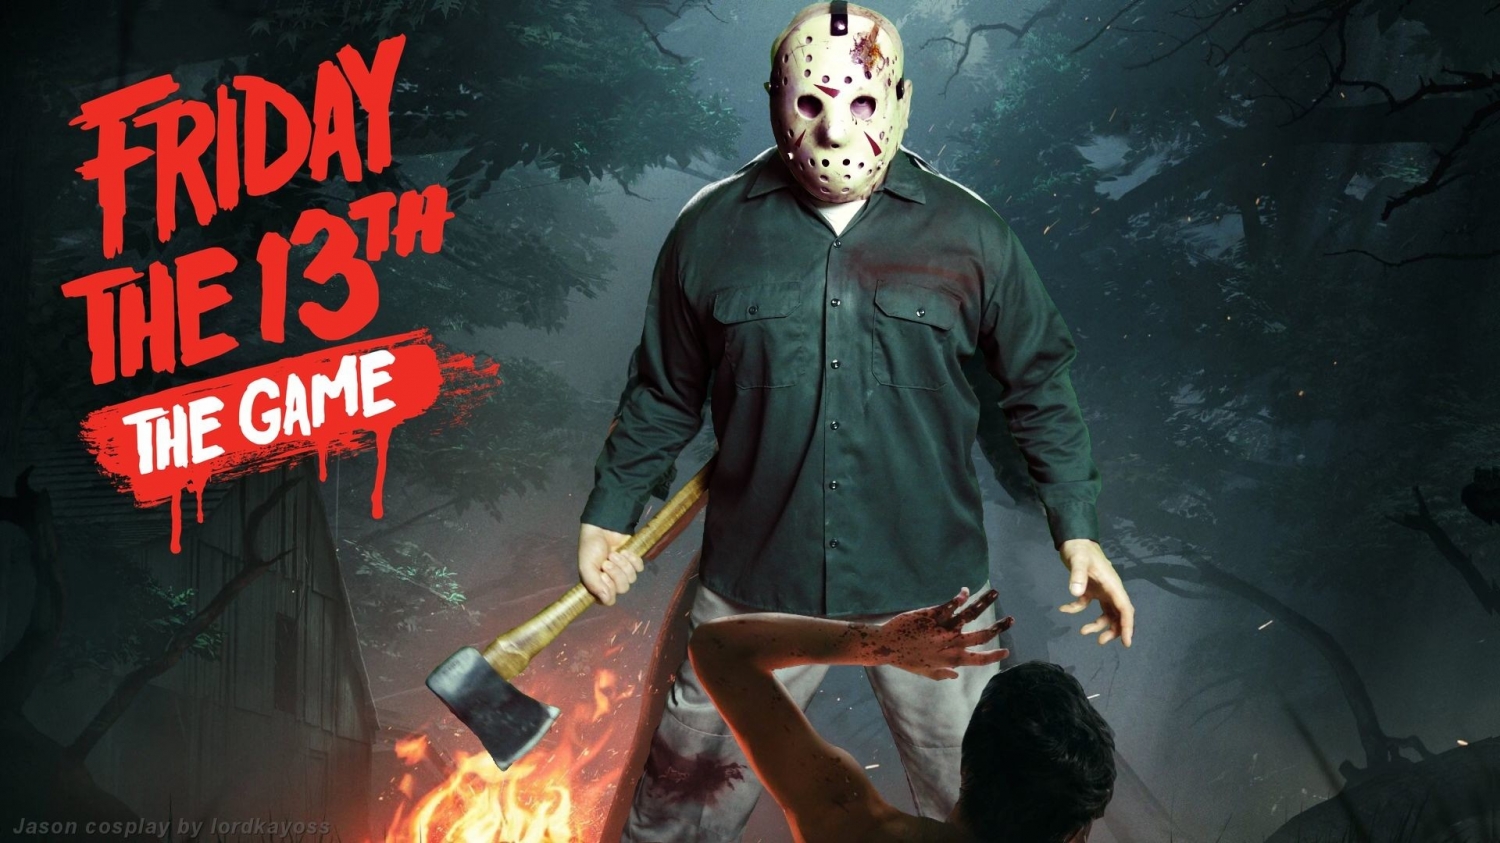 Rise and Fall of Friday the 13th: The Game : r/F13thegame